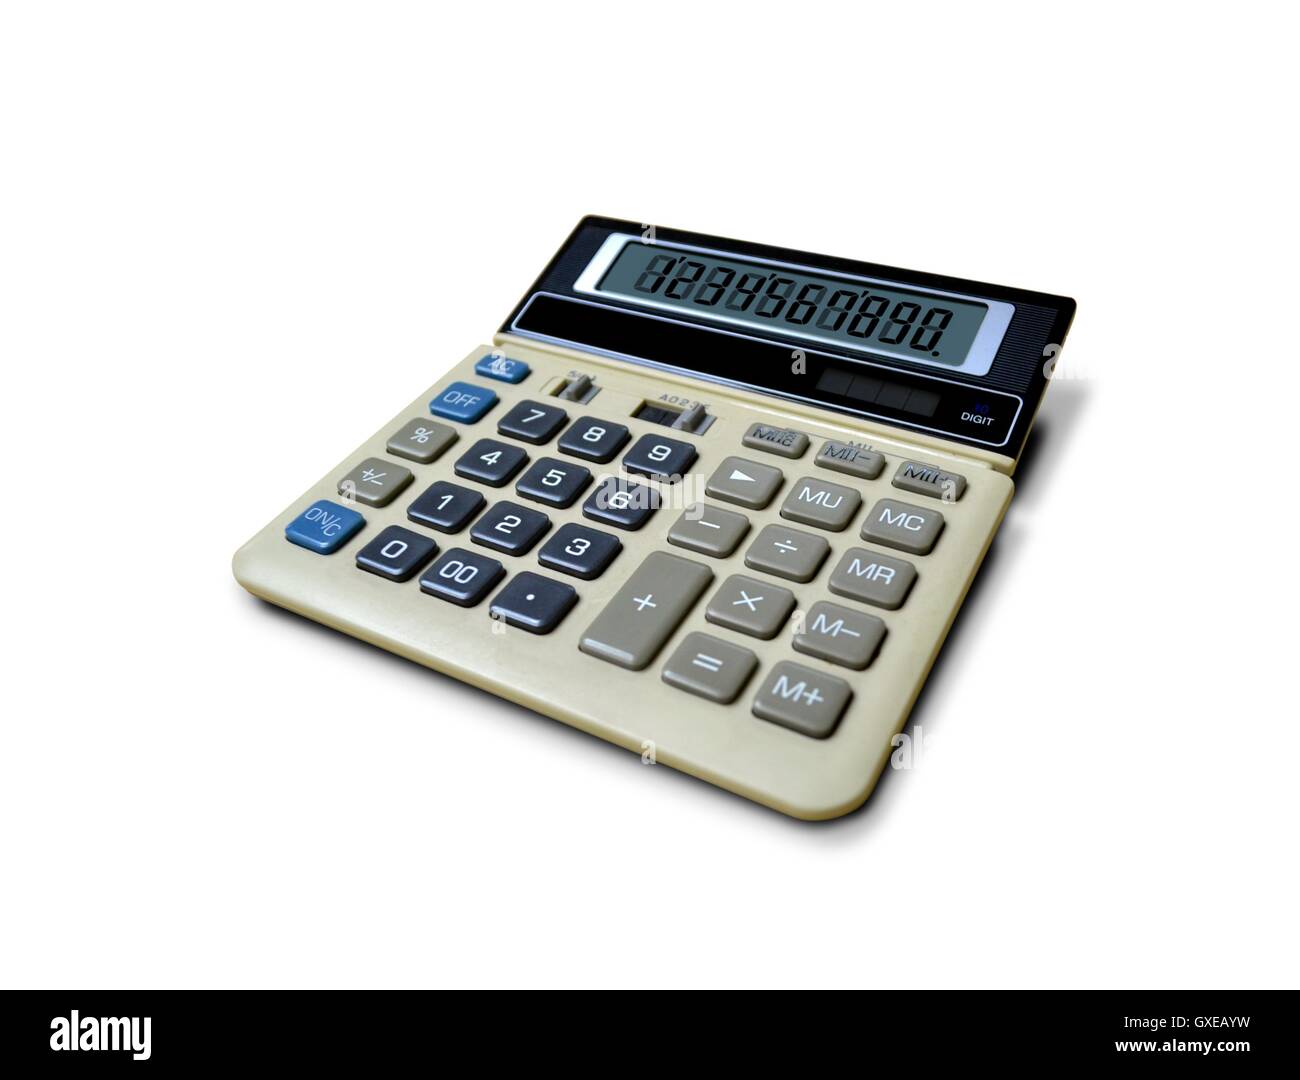 Calculator with Dual Power Function Stock Photo